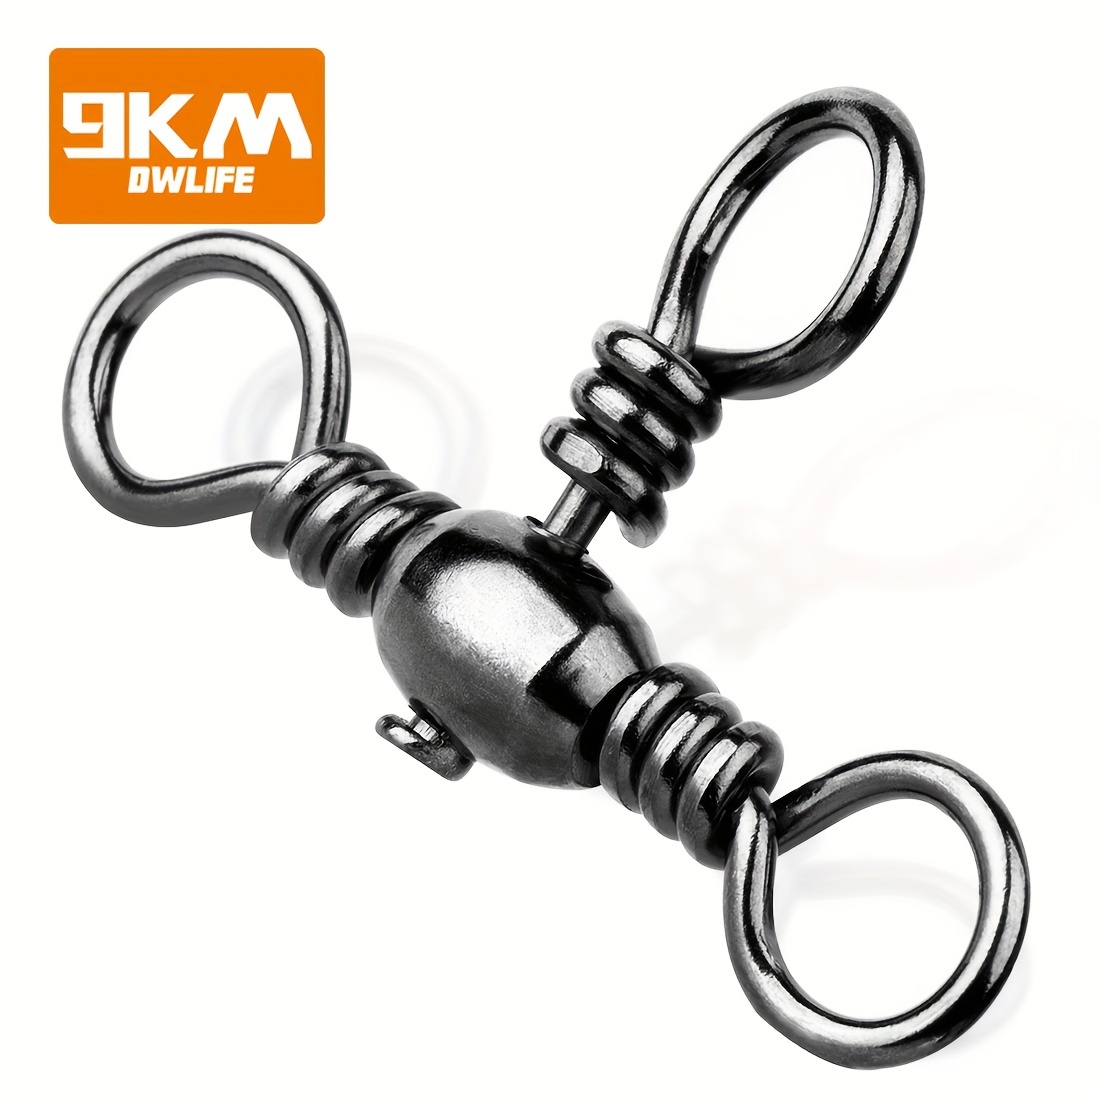 50pcs 3-Way Barrel Cross Line Fishing Swivel with Solid Ring Brass Hooks -  Superb Fishing Connectors for All Anglers!